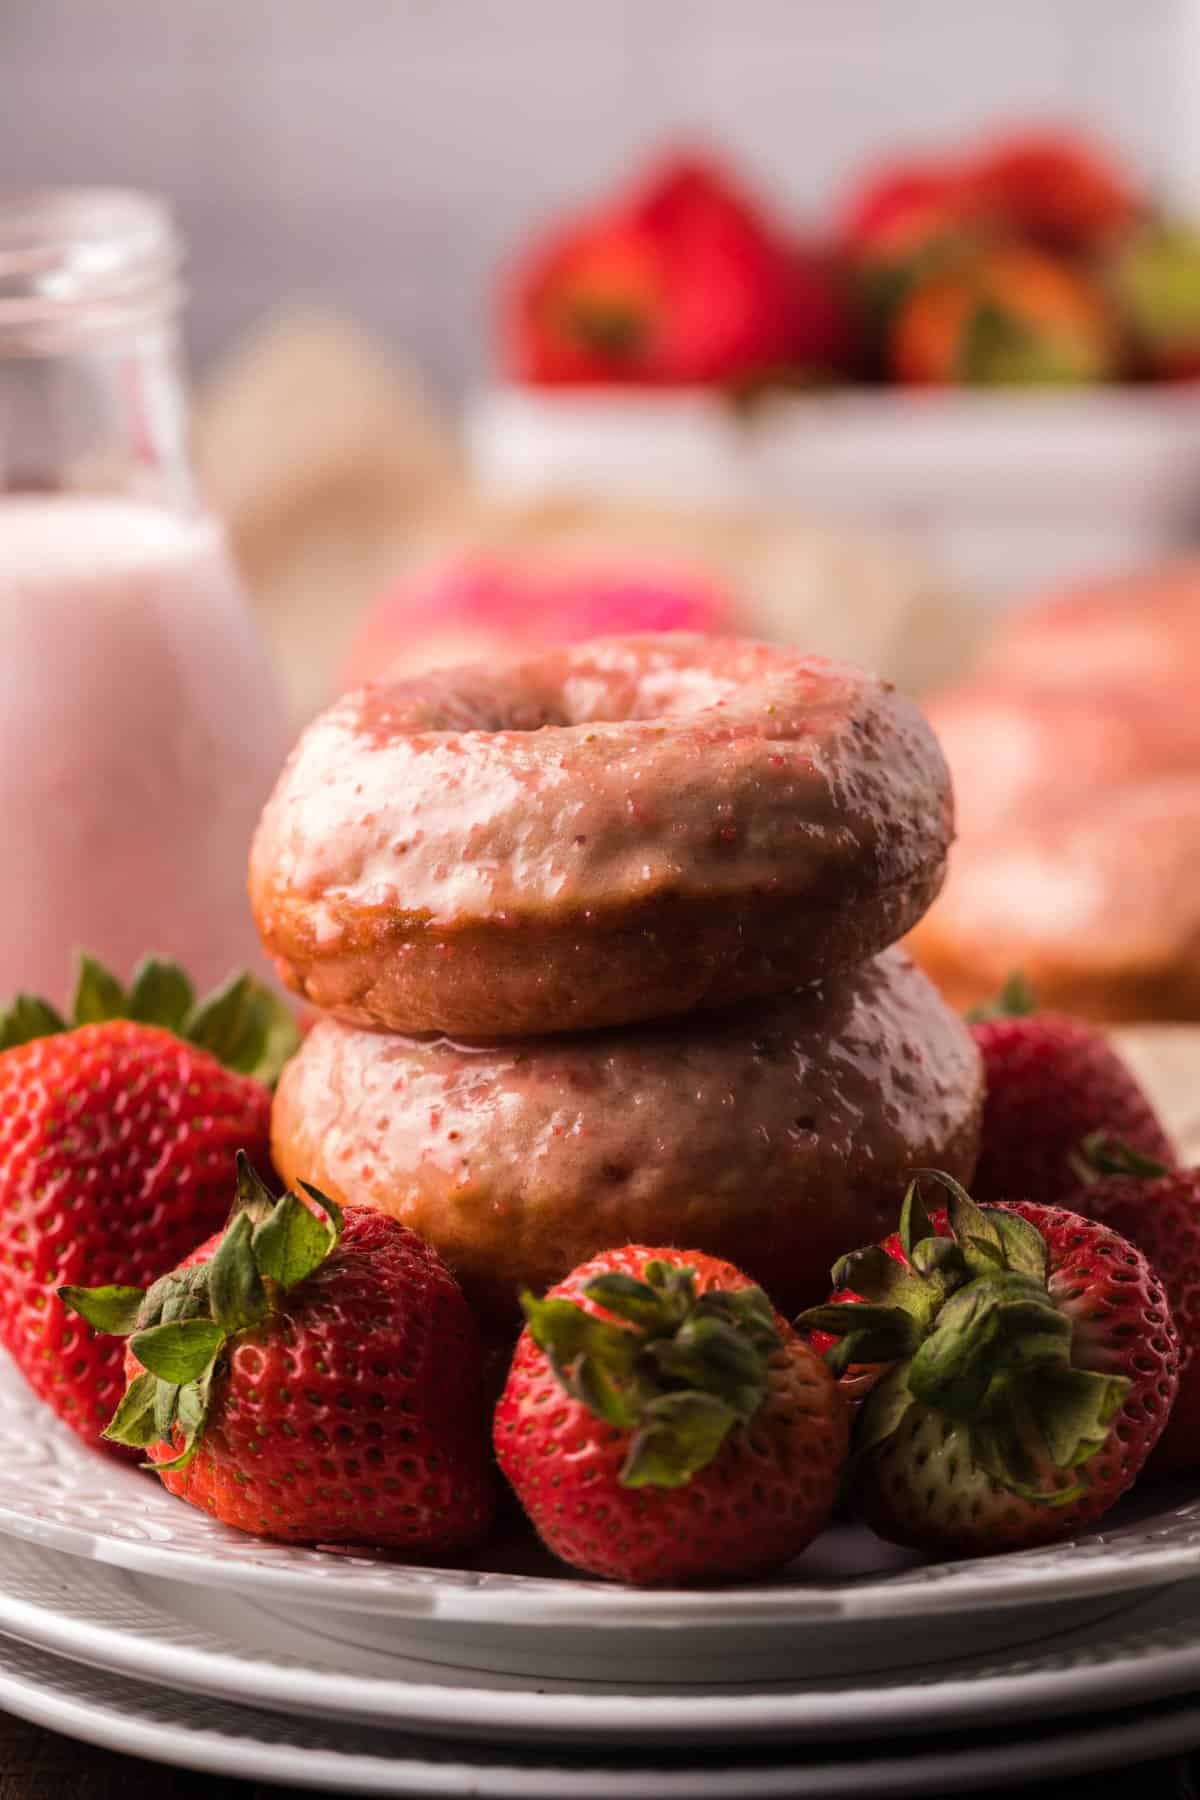 Two donuts on white plates surrounded by fresh strawberries.